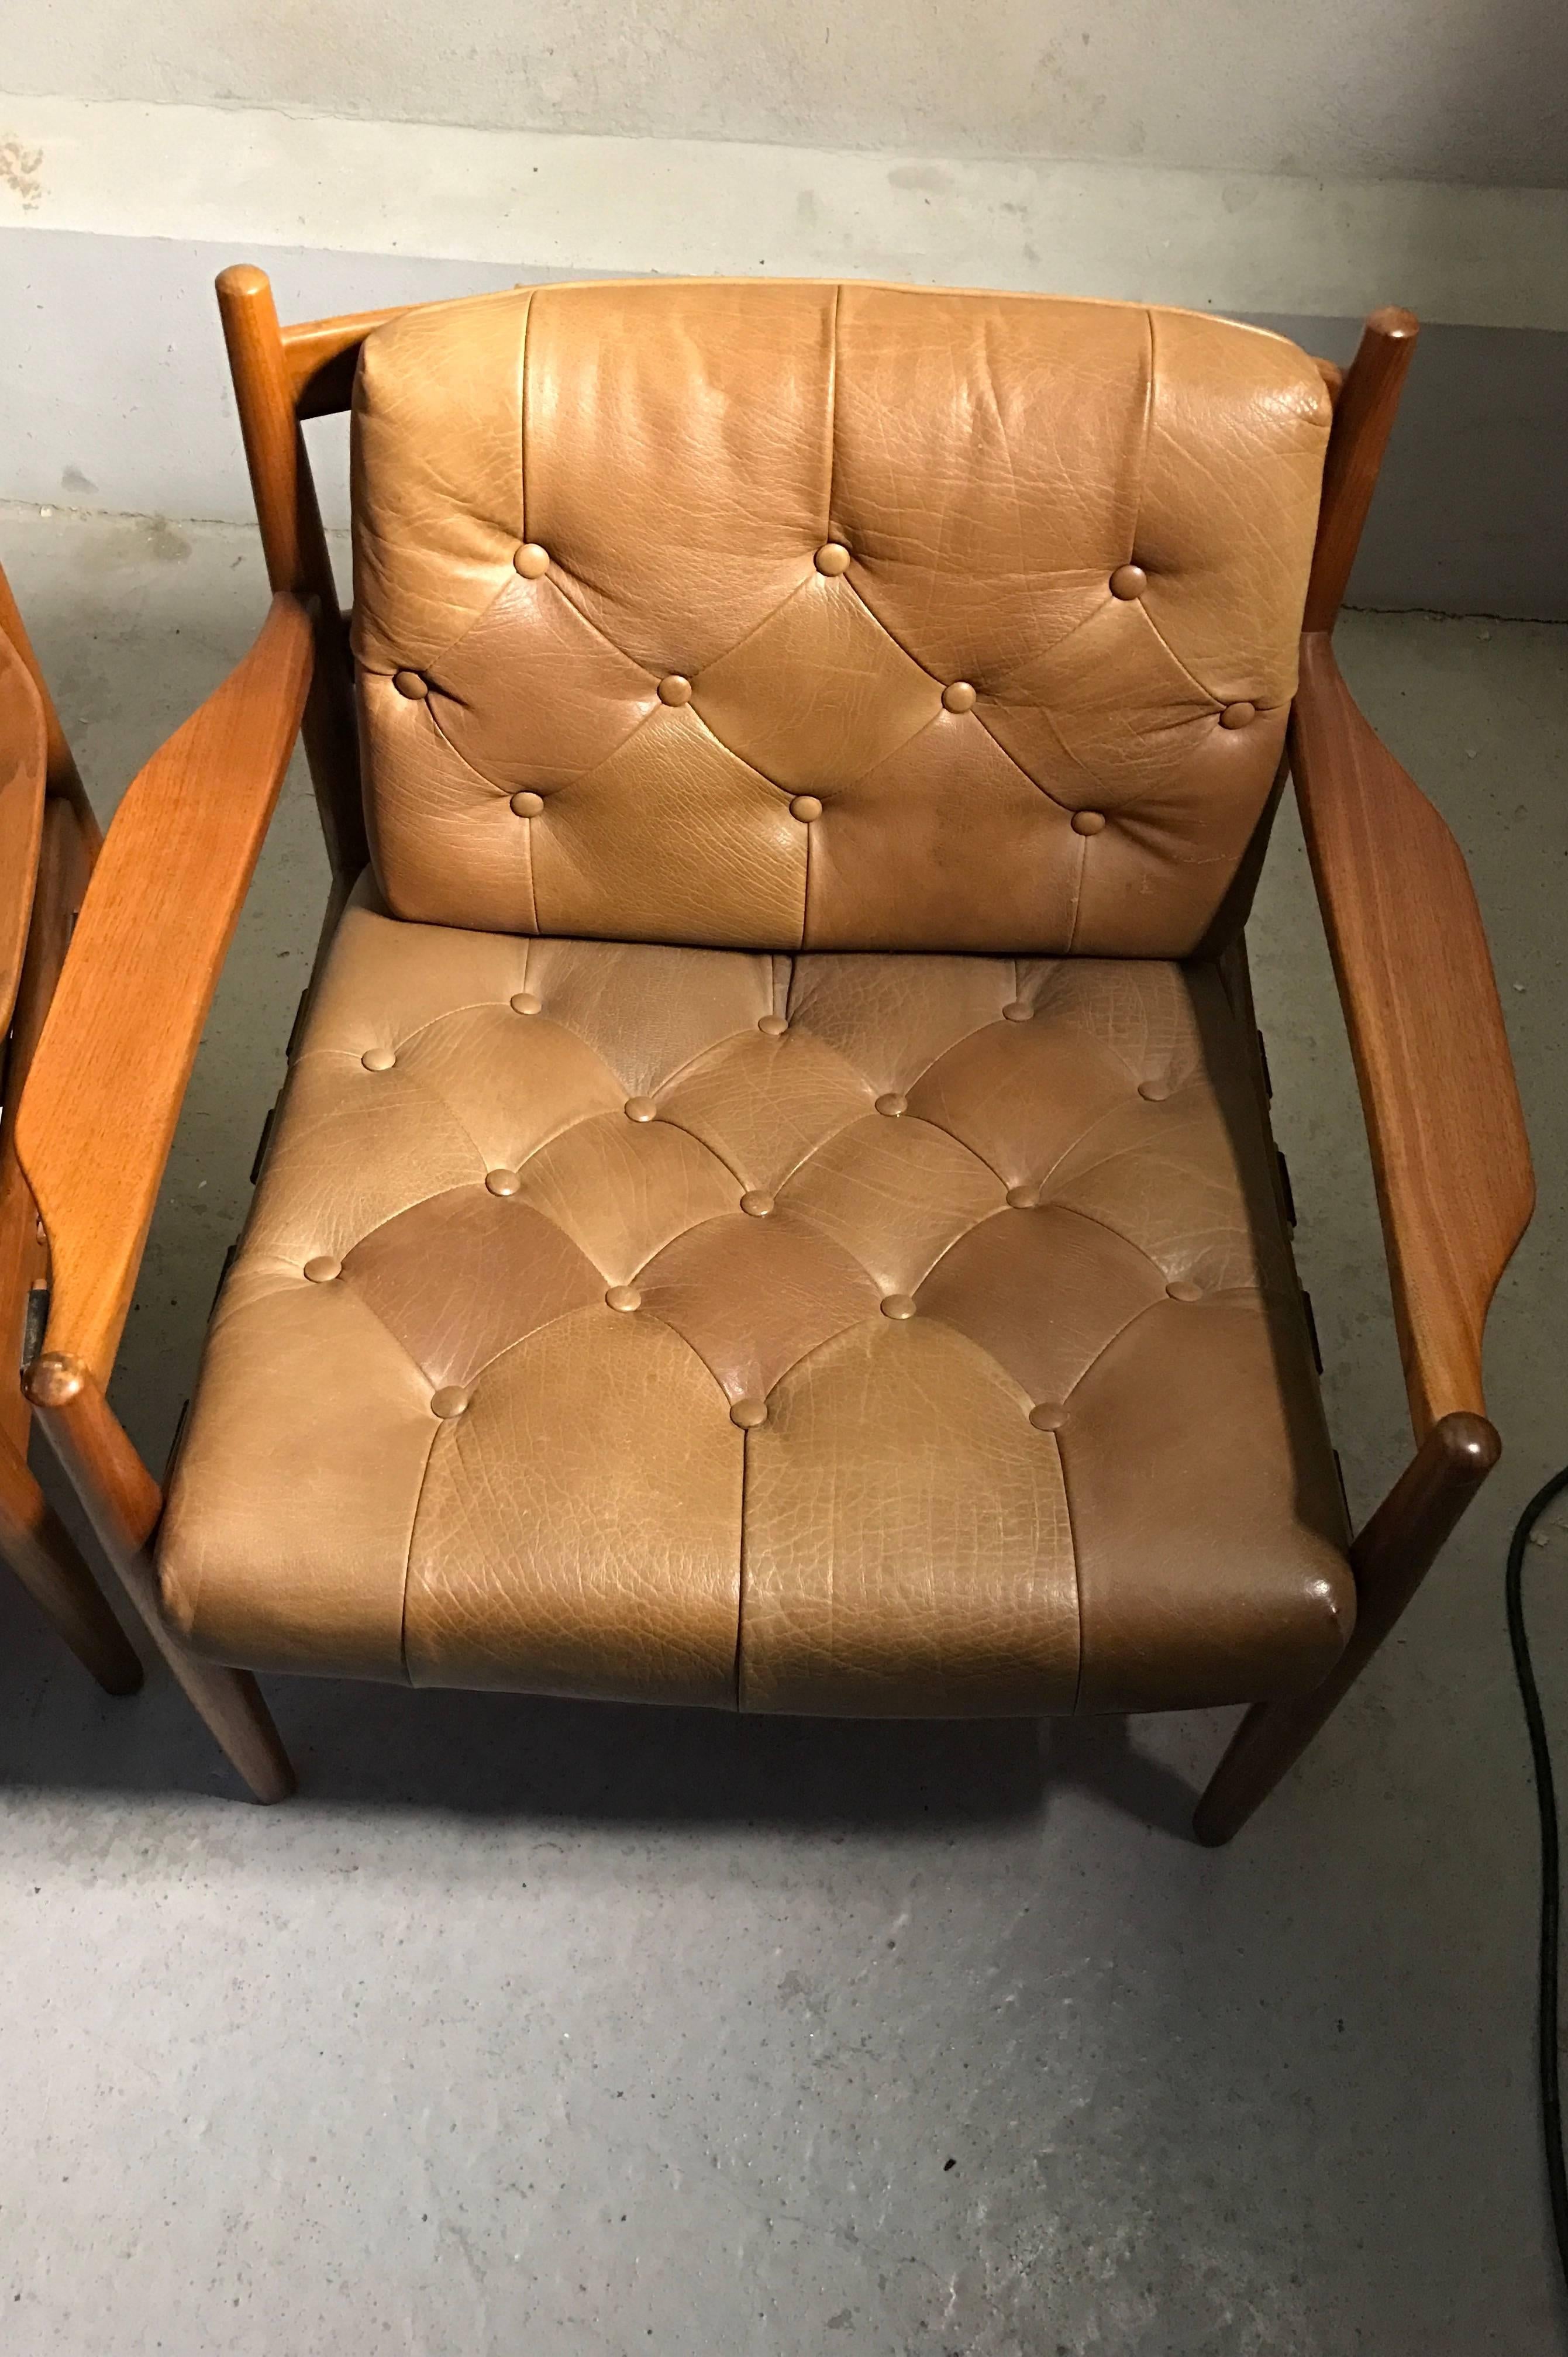 Beech Pair of Armchairs by Ingemar Thillmark for OPE Mobler, Midcentury Modern